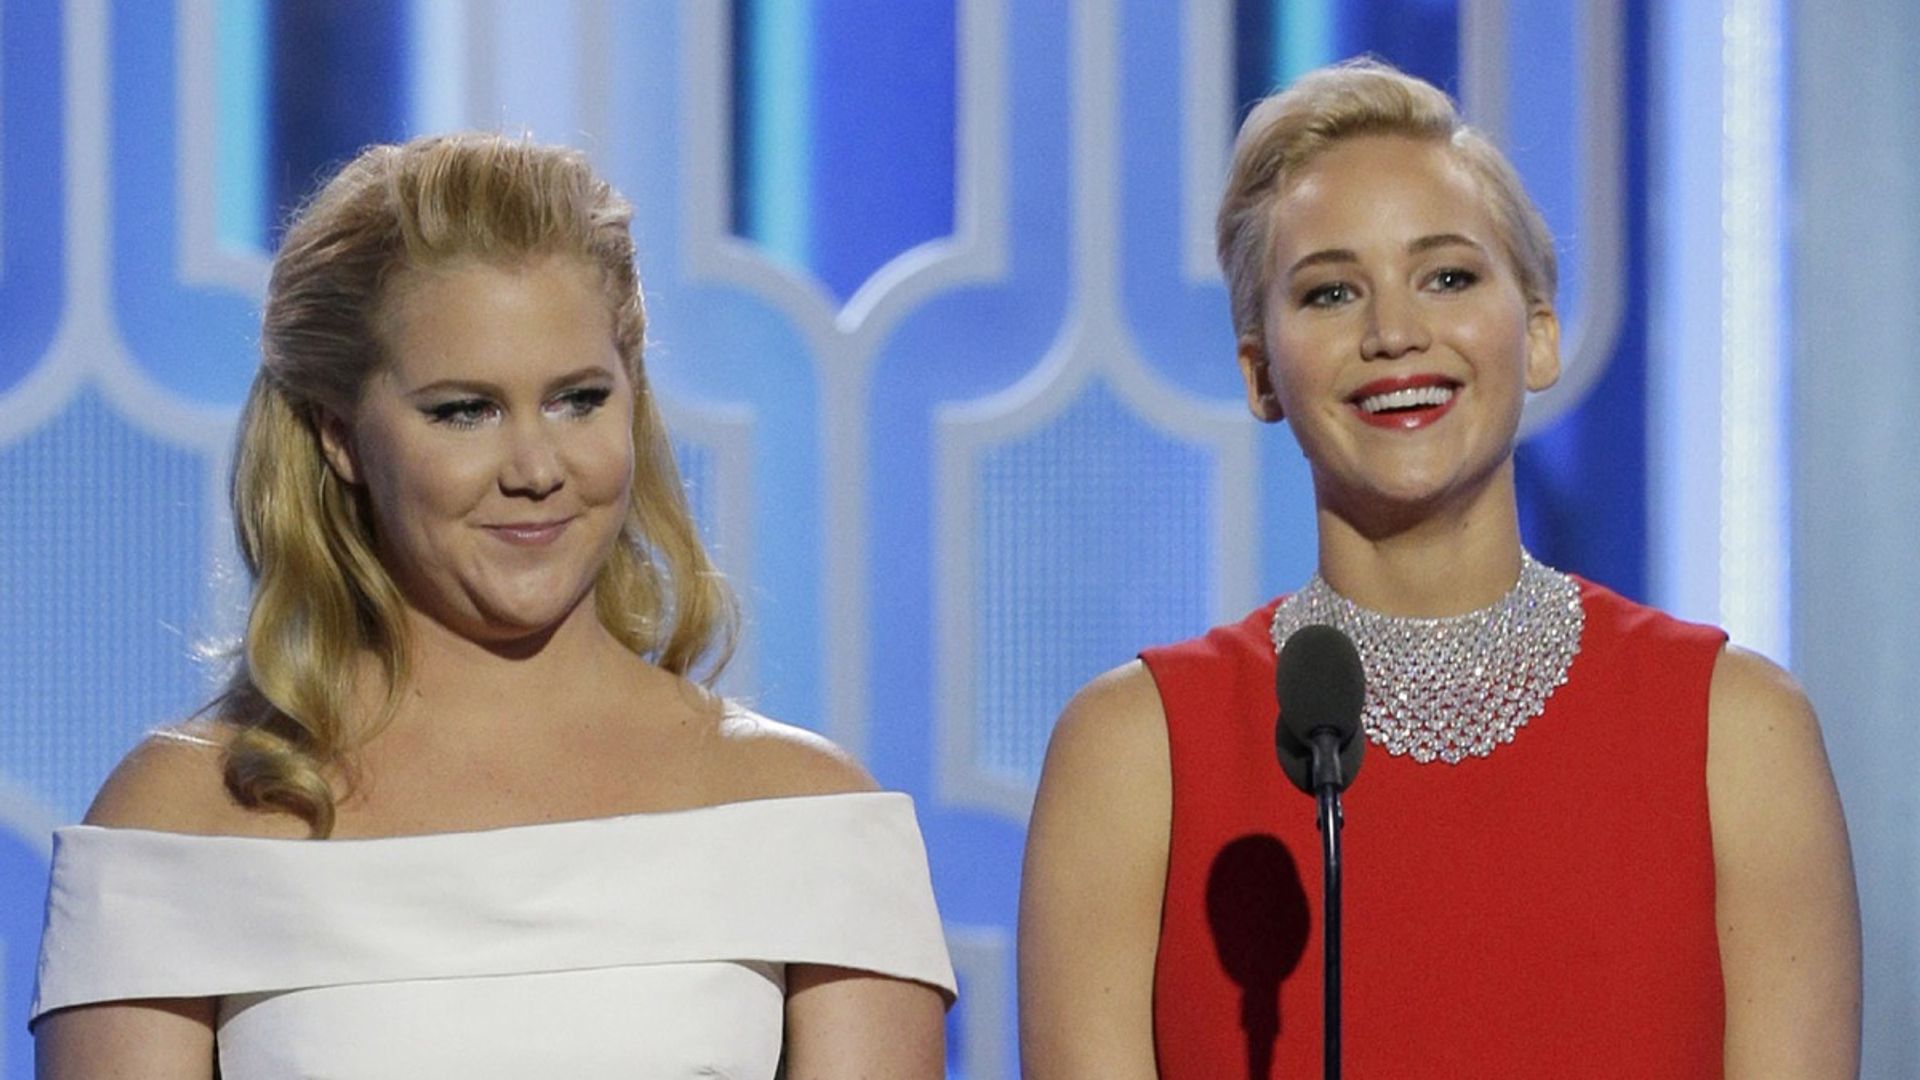 Pregnant Jennifer Lawrence rocks gingham dress for special reunion with Amy Schumer